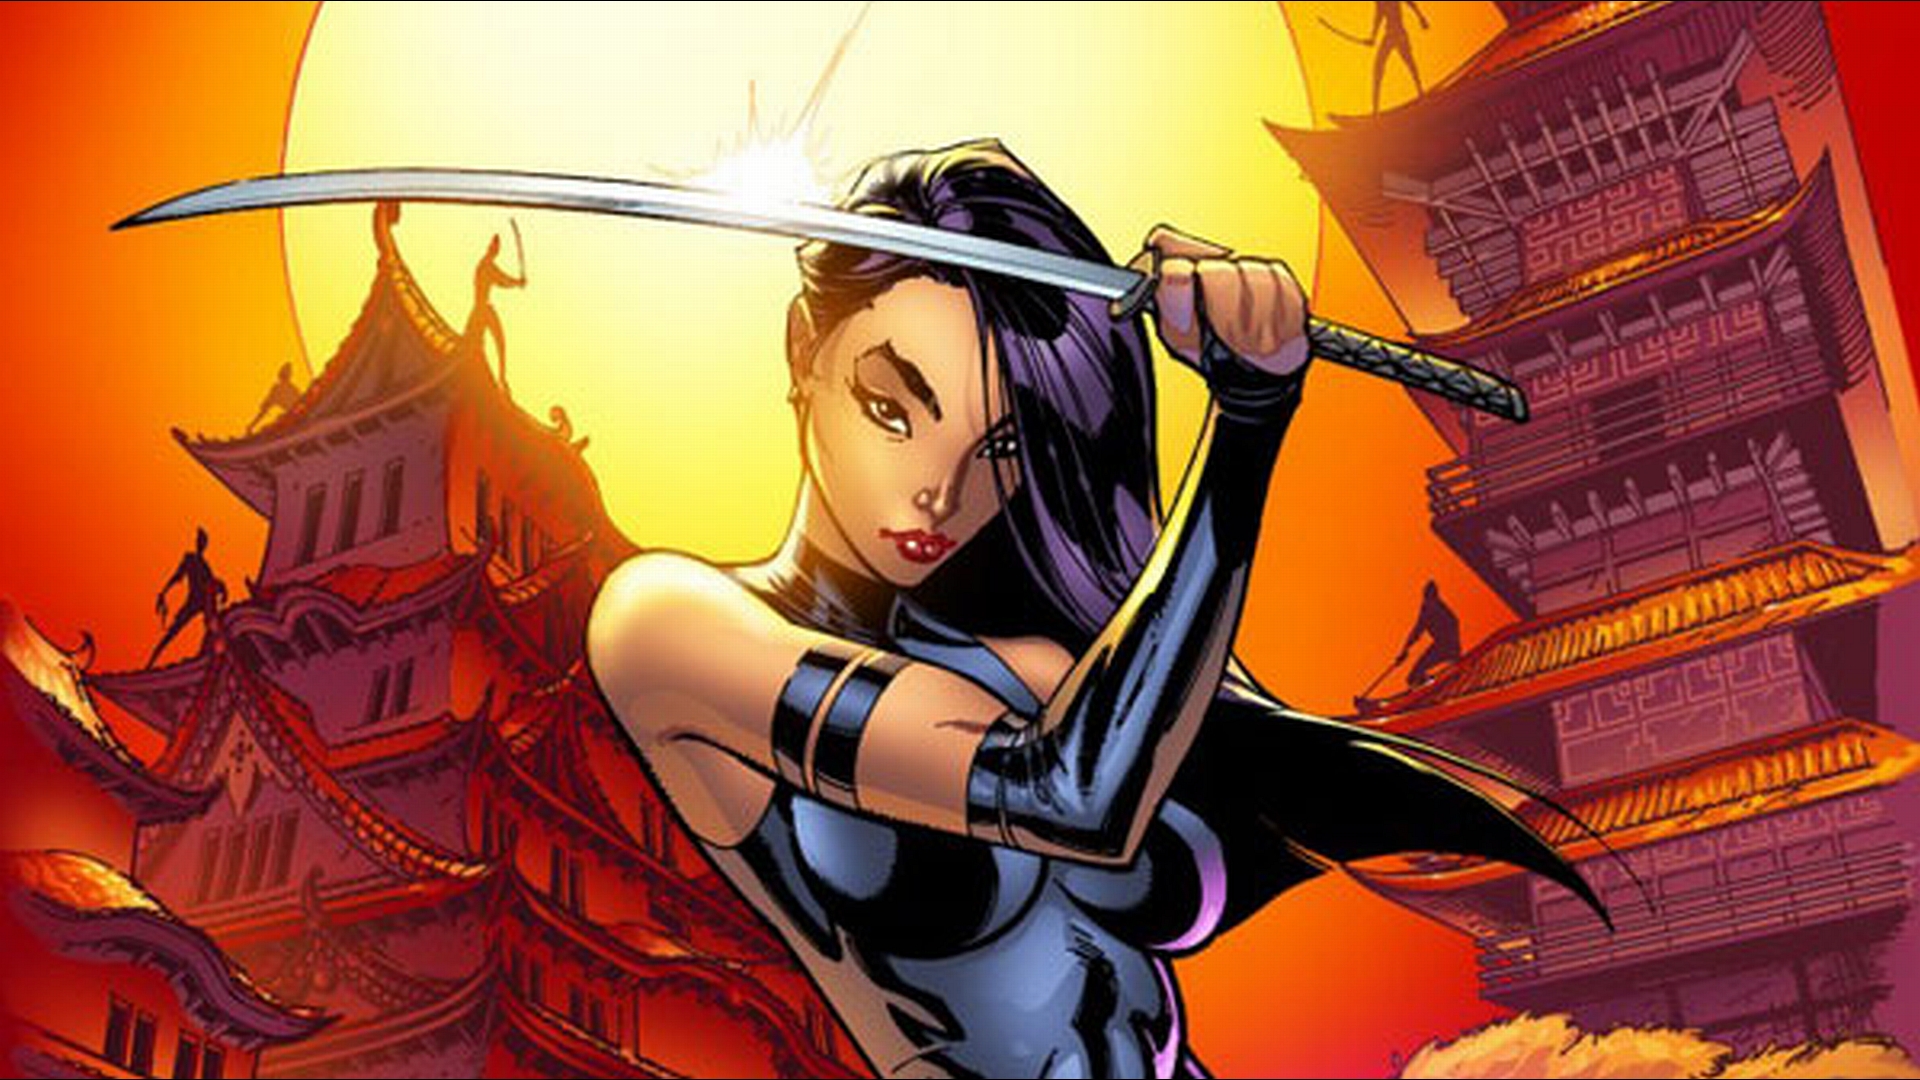 Psylocke from comics in a dynamic pose, ready for action